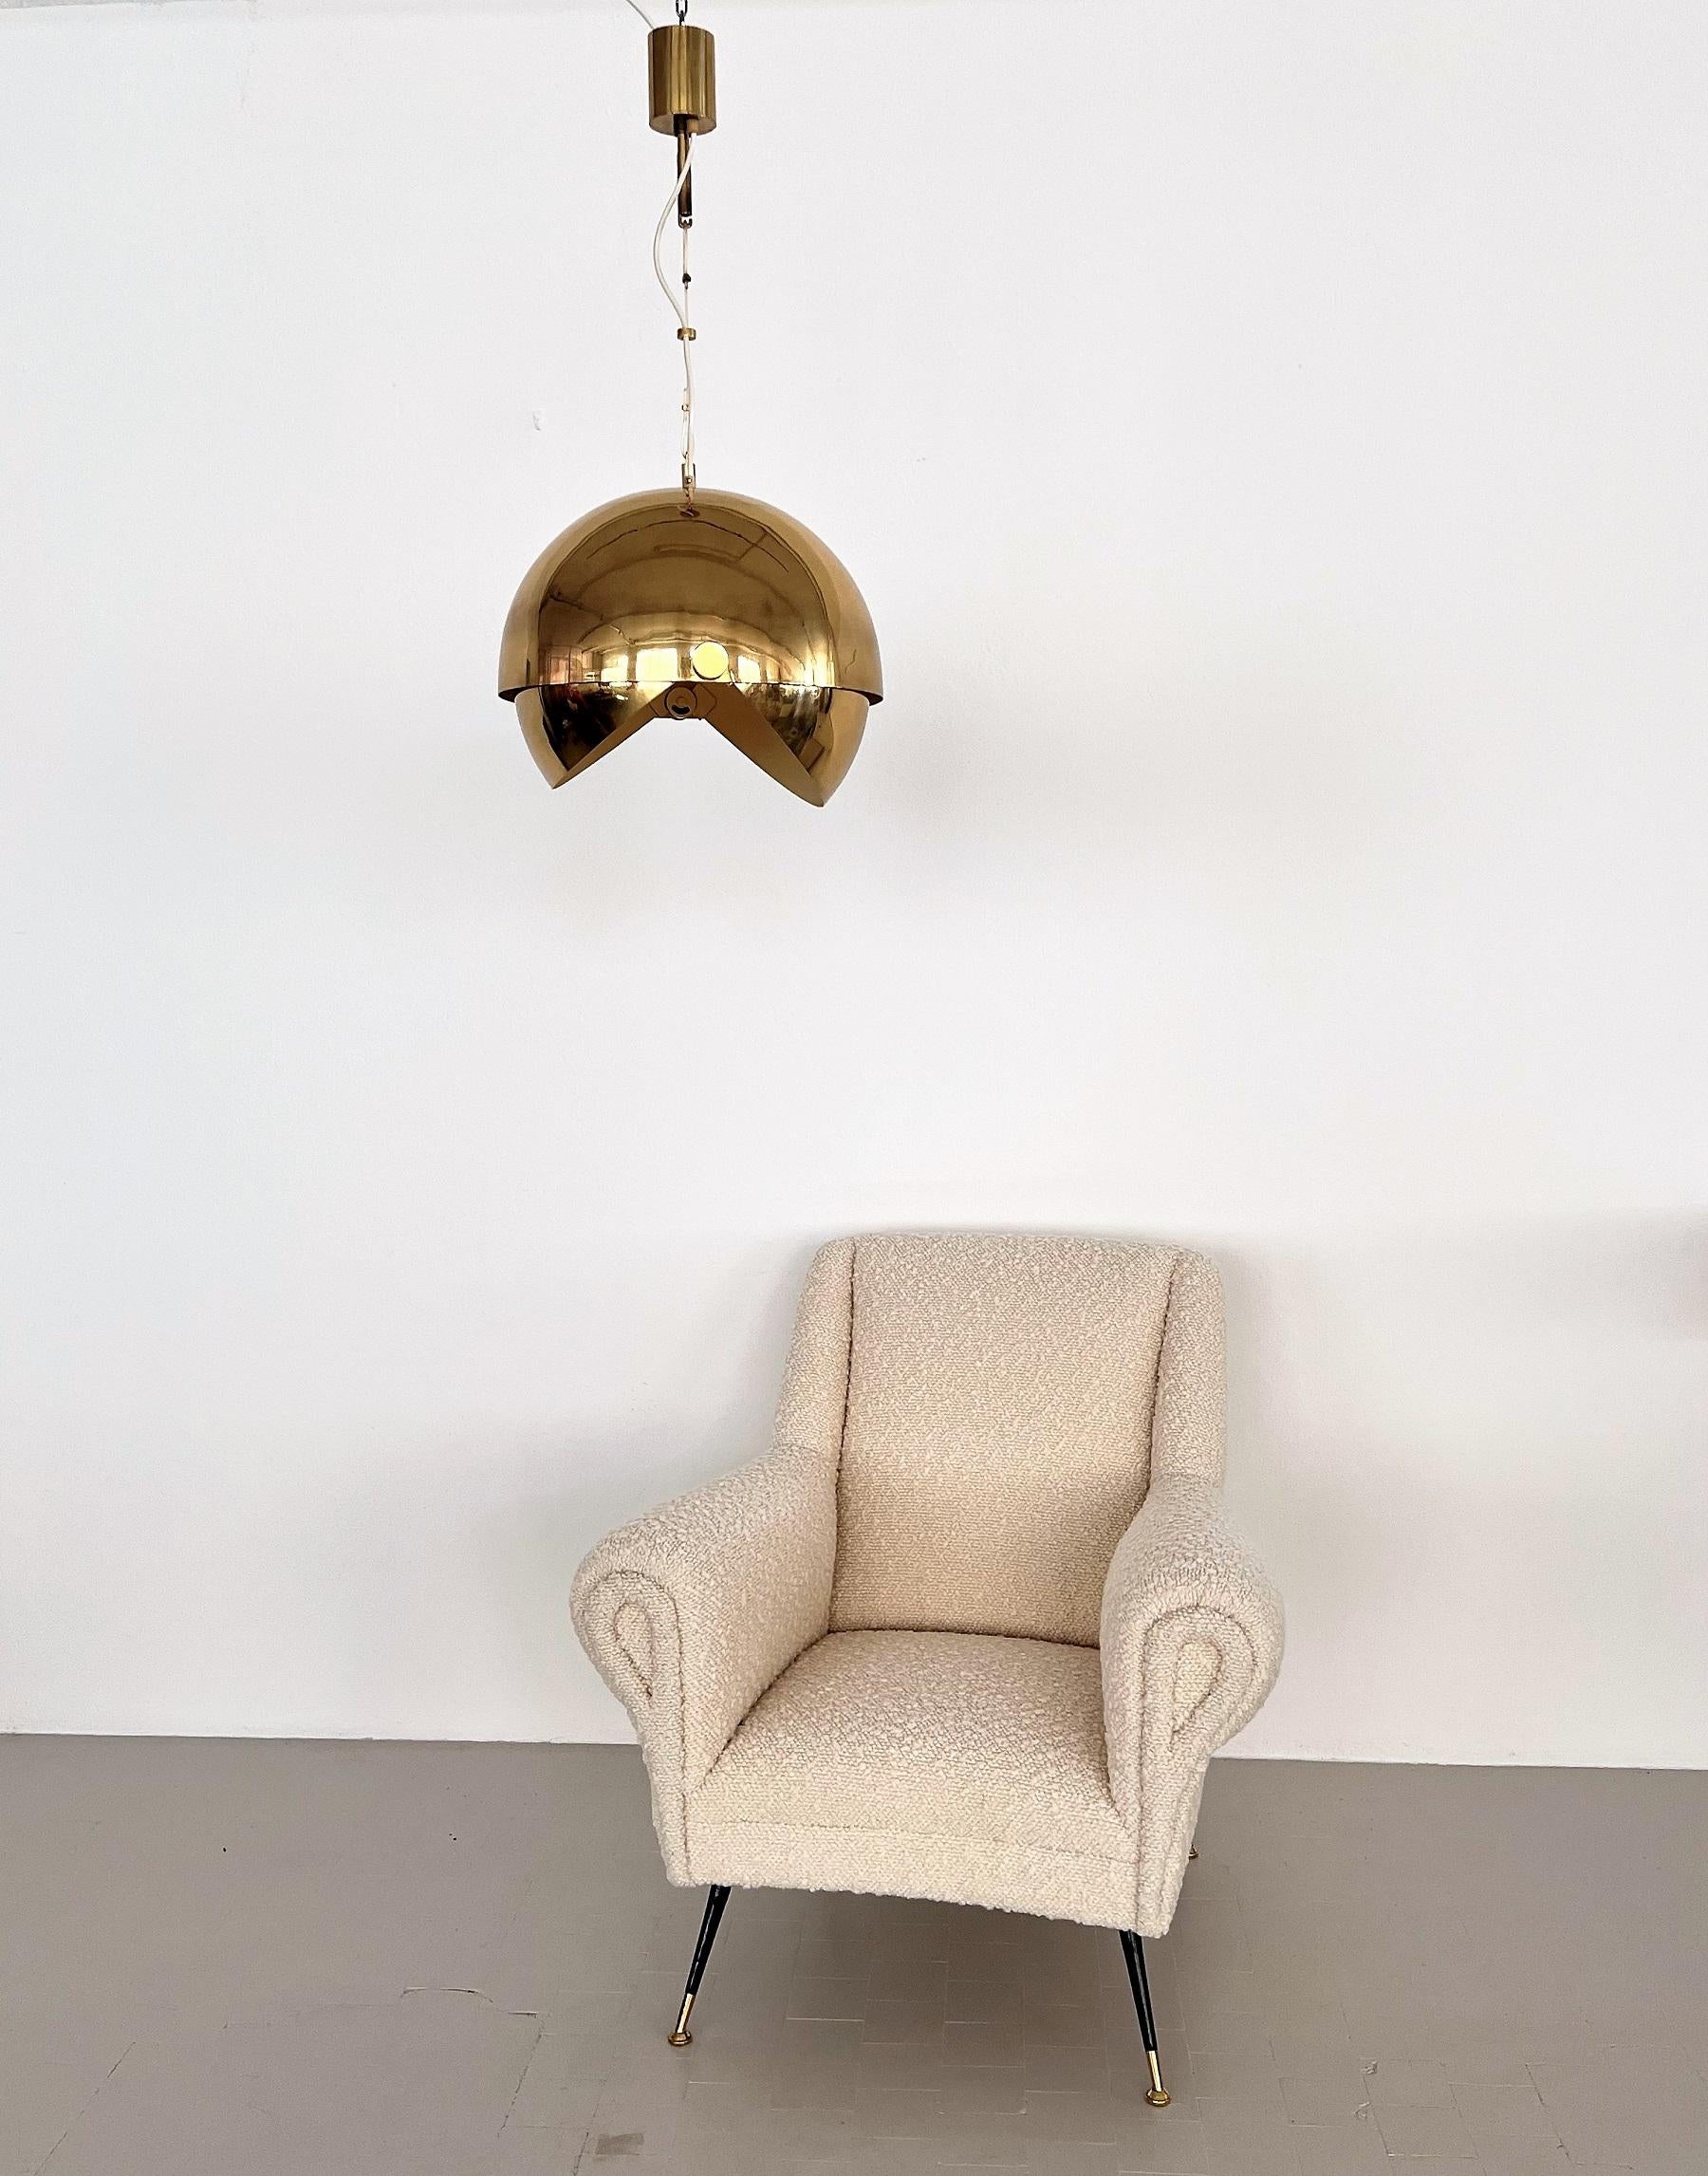 Beautiful and rare pendant lamp from the high-quality artisan production in Munich, Germany, of the 1970s.
The lamp is made of thick solid brass and completely handmade.
It consists of three brass parts: the upper, large round lamp part is fixed and